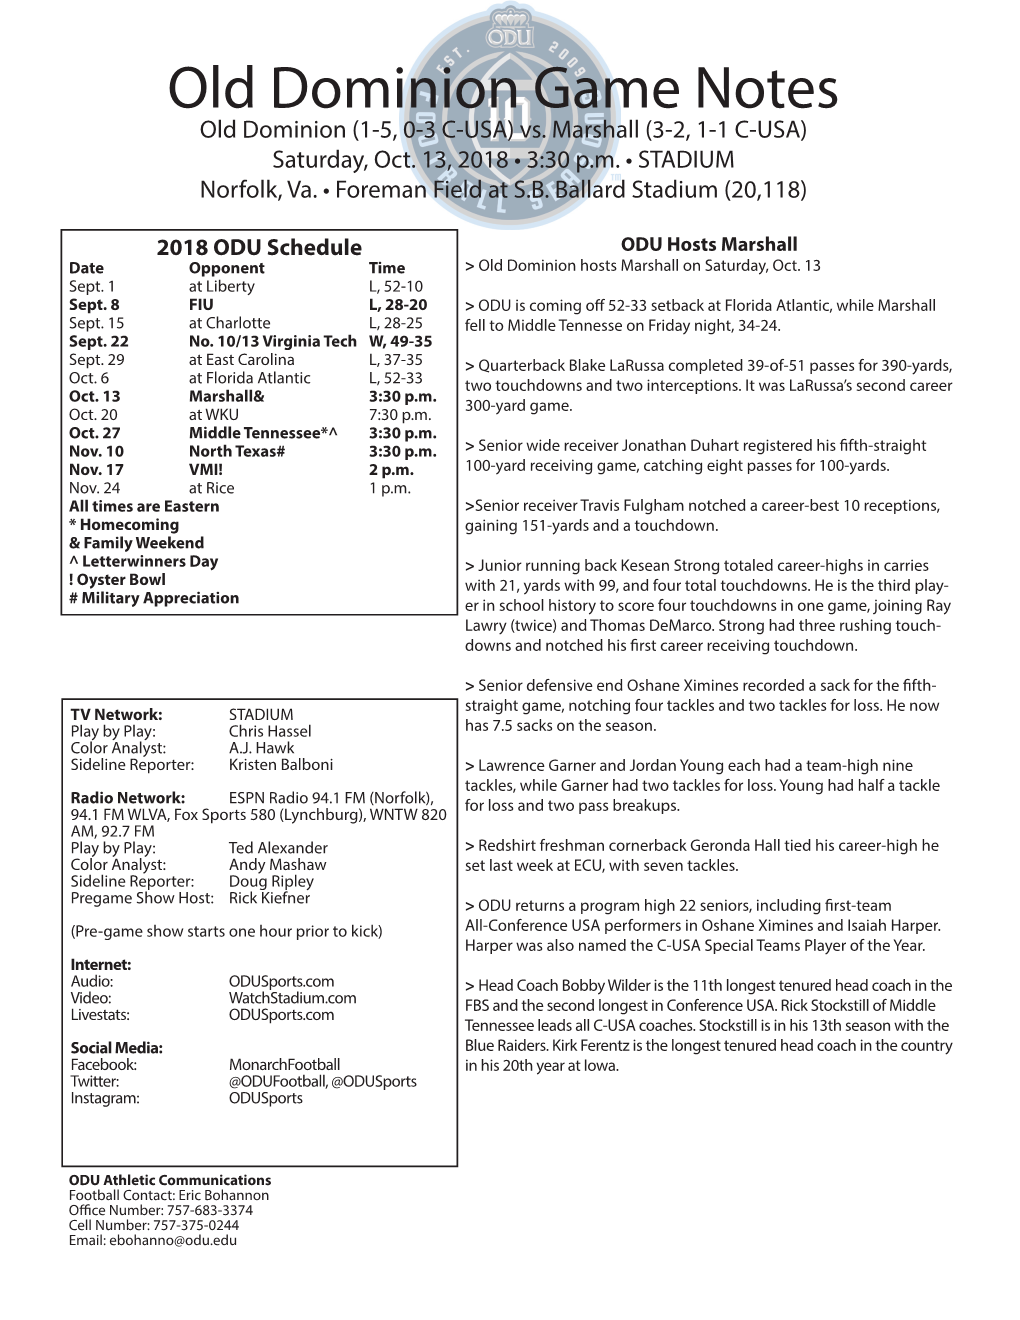 Old Dominion Game Notes Old Dominion (1-5, 0-3 C-USA) Vs